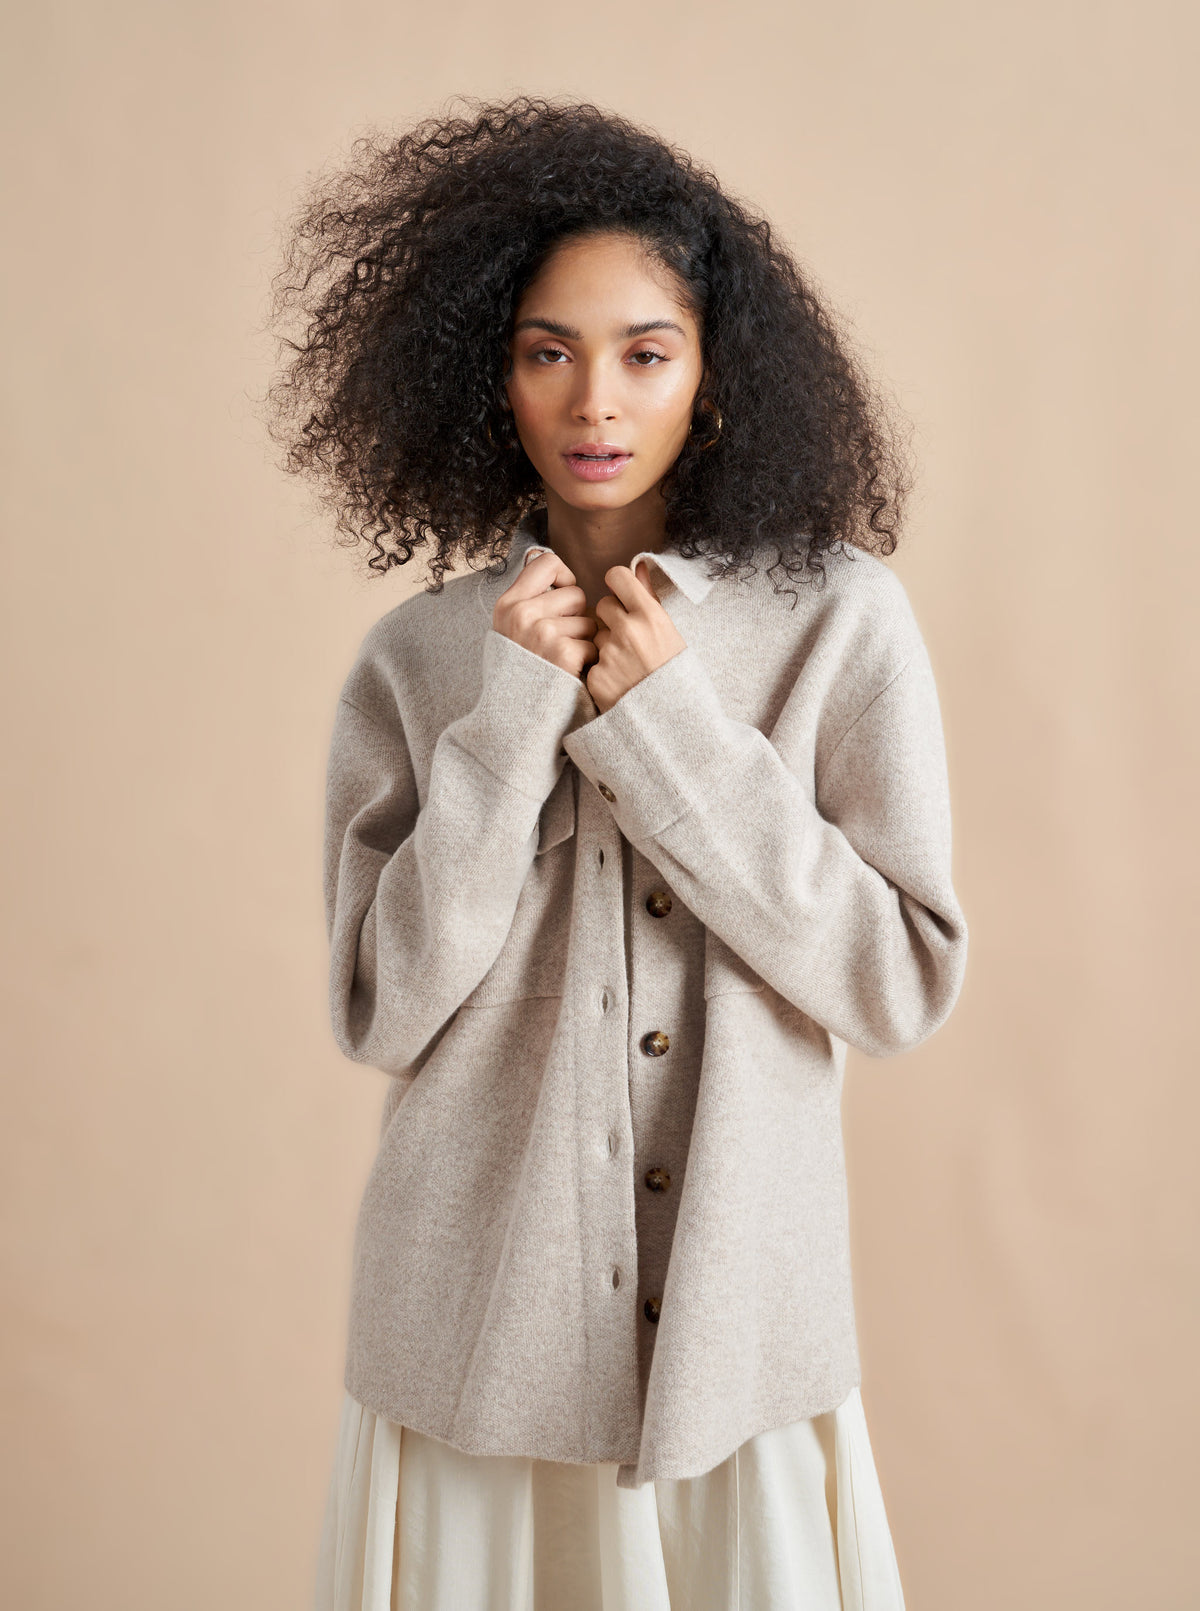 The perfect oversize shirt but when spun in our signature wool/cashmere blend becomes your go-to outwear choice. Whether you wear it on its own or layered over a thinner sweater this knit jacket is where functionality meets luxury meets obsession.